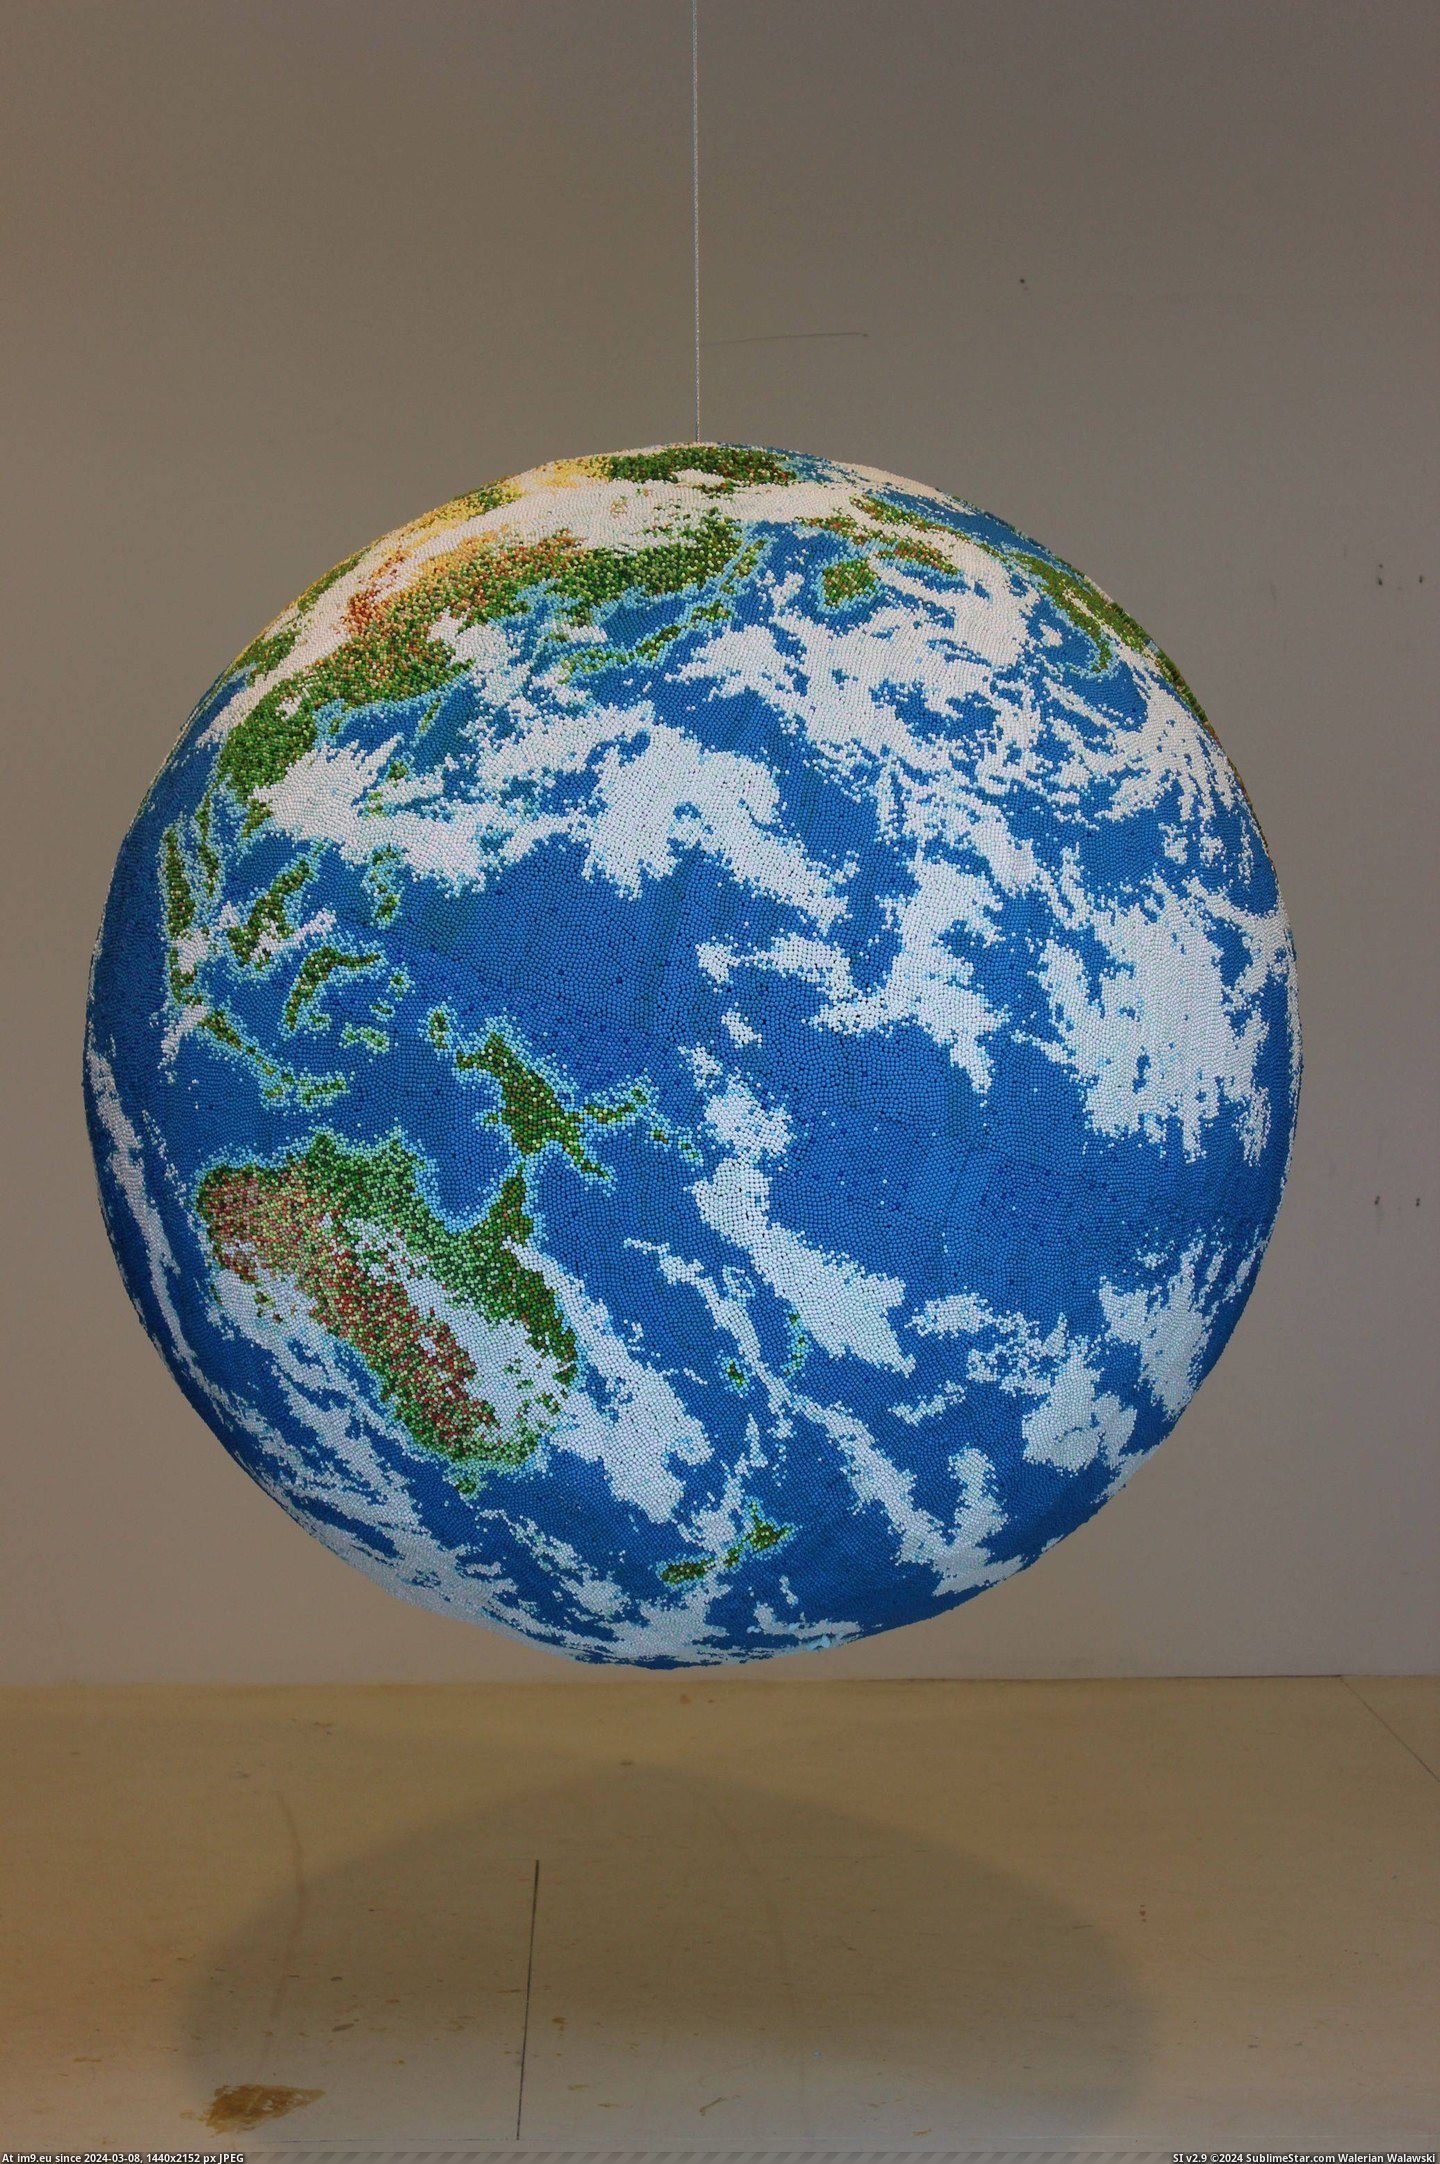 #Years #Making #Globe #Matches #Sculptor #Dad #Spent [Pics] My dad is a sculptor and has spent 2 years making this globe made entirely out of matches. 17 Pic. (Bild von album My r/PICS favs))